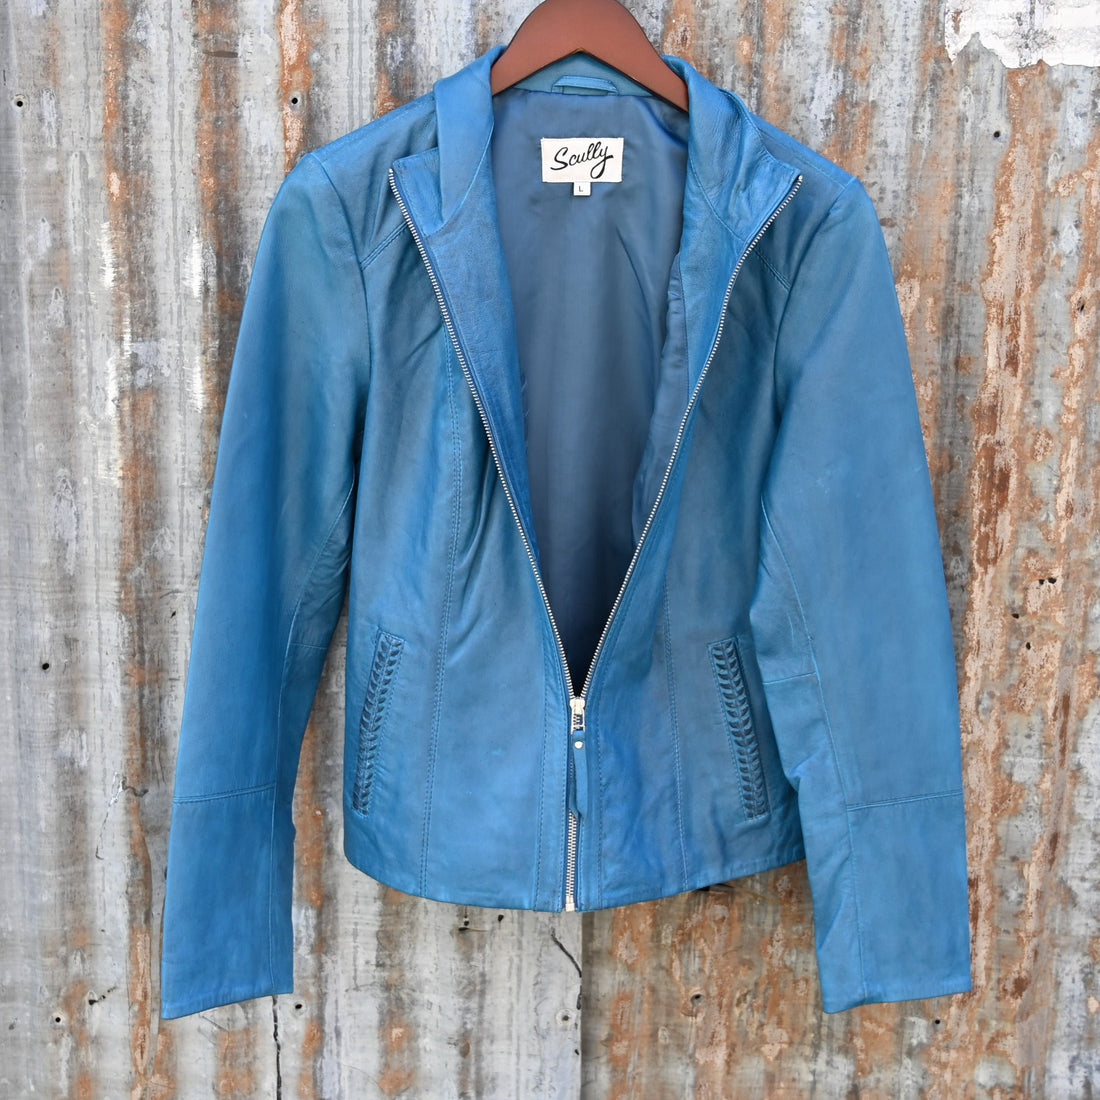 Ladies Lightweight Leather Jacket with Zip Front in Denim view of front